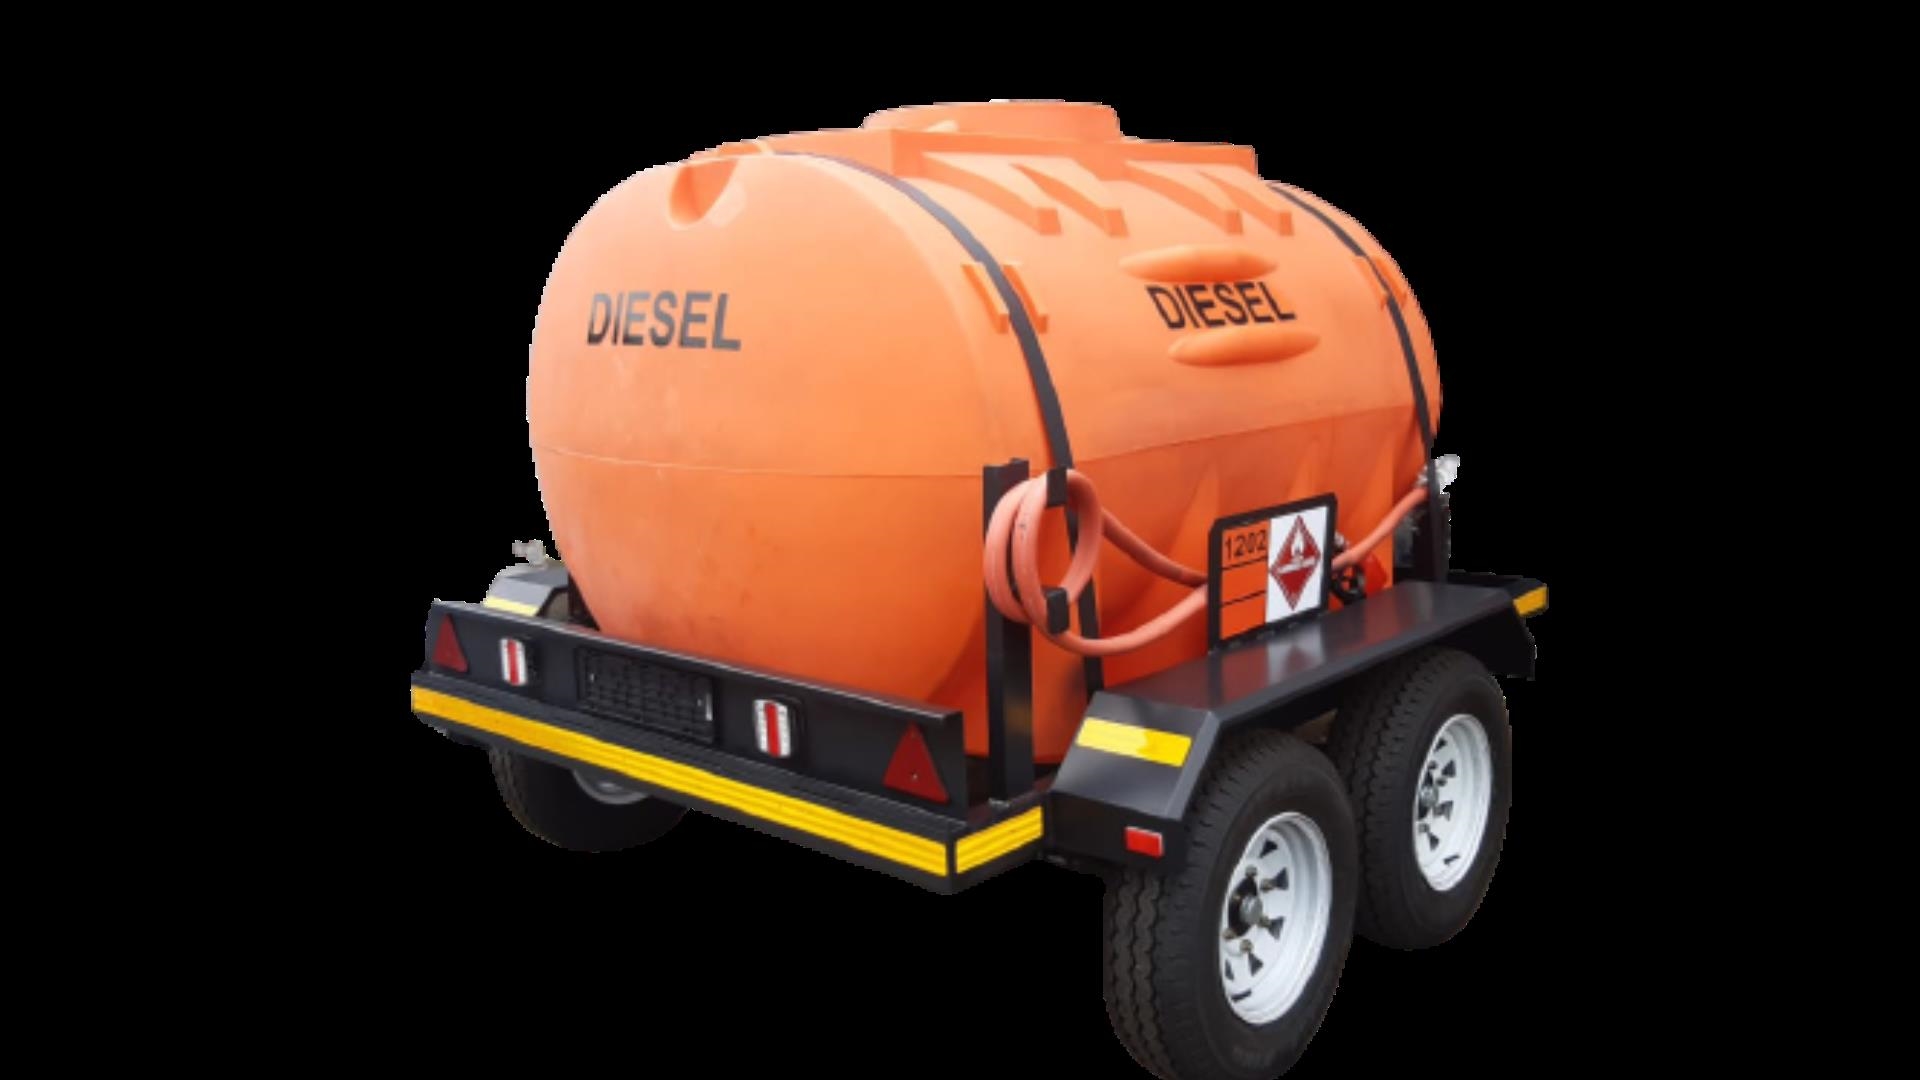 Custom Diesel bowser trailer 2500 Litre Plastic Diesel Bowser KZN 2021 for sale by Jikelele Tankers and Trailers   | Truck & Trailer Marketplaces